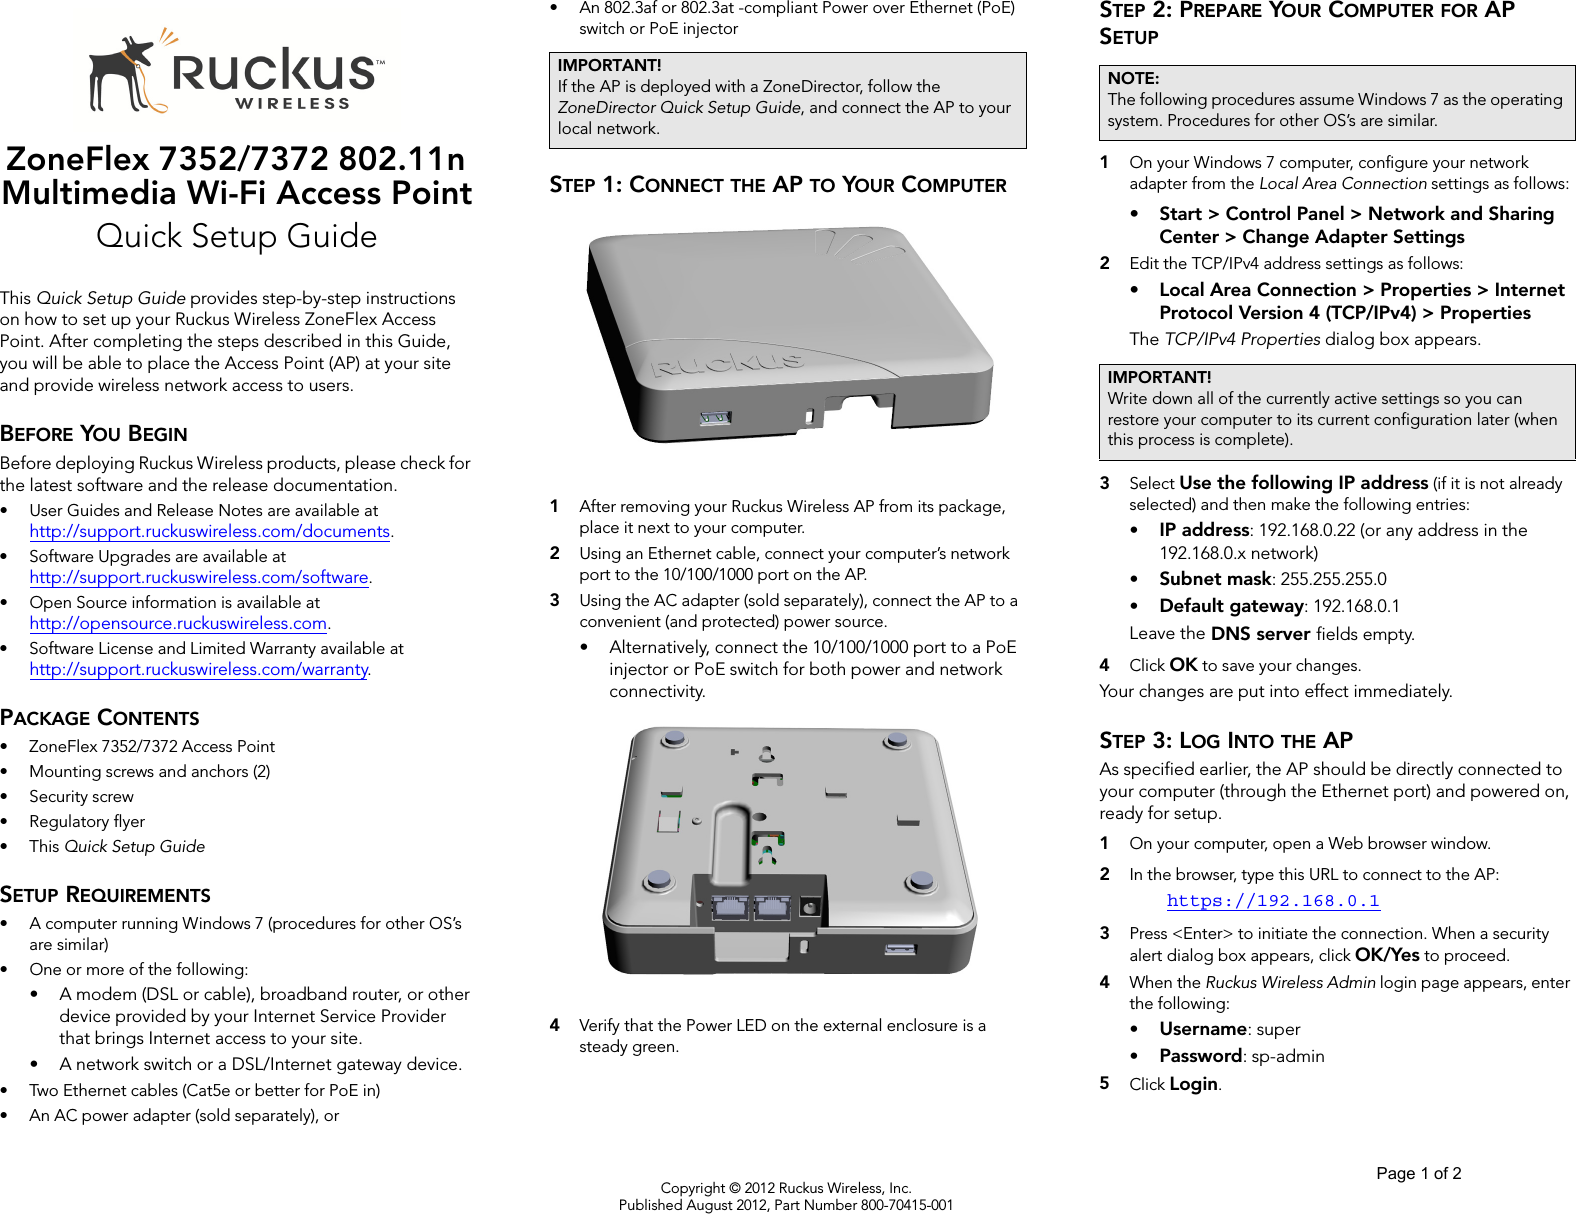 Copyright © 2012 Ruckus Wireless, Inc.Published August 2012, Part Number 800-70415-001ZoneFlex 7352/7372 802.11n Multimedia Wi-Fi Access PointQuick Setup GuideThis Quick Setup Guide provides step-by-step instructions on how to set up your Ruckus Wireless ZoneFlex Access Point. After completing the steps described in this Guide, you will be able to place the Access Point (AP) at your site and provide wireless network access to users.BEFORE YOU BEGINBefore deploying Ruckus Wireless products, please check for the latest software and the release documentation.• User Guides and Release Notes are available at http://support.ruckuswireless.com/documents.• Software Upgrades are available athttp://support.ruckuswireless.com/software.• Open Source information is available athttp://opensource.ruckuswireless.com.• Software License and Limited Warranty available at http://support.ruckuswireless.com/warranty.PACKAGE CONTENTS• ZoneFlex 7352/7372 Access Point• Mounting screws and anchors (2)• Security screw• Regulatory flyer•This Quick Setup GuideSETUP REQUIREMENTS• A computer running Windows 7 (procedures for other OS’s are similar)• One or more of the following:• A modem (DSL or cable), broadband router, or other device provided by your Internet Service Provider that brings Internet access to your site. • A network switch or a DSL/Internet gateway device.• Two Ethernet cables (Cat5e or better for PoE in)• An AC power adapter (sold separately), or• An 802.3af or 802.3at -compliant Power over Ethernet (PoE) switch or PoE injectorSTEP 1: CONNECT THE AP TO YOUR COMPUTER1After removing your Ruckus Wireless AP from its package, place it next to your computer.2Using an Ethernet cable, connect your computer’s network port to the 10/100/1000 port on the AP. 3Using the AC adapter (sold separately), connect the AP to a convenient (and protected) power source. • Alternatively, connect the 10/100/1000 port to a PoE injector or PoE switch for both power and network connectivity.4Verify that the Power LED on the external enclosure is a steady green. STEP 2: PREPARE YOUR COMPUTER FOR AP SETUP1On your Windows 7 computer, configure your network adapter from the Local Area Connection settings as follows:• Start &gt; Control Panel &gt; Network and Sharing Center &gt; Change Adapter Settings2Edit the TCP/IPv4 address settings as follows: • Local Area Connection &gt; Properties &gt; Internet Protocol Version 4 (TCP/IPv4) &gt; PropertiesThe TCP/IPv4 Properties dialog box appears.3Select Use the following IP address (if it is not already selected) and then make the following entries:•IP address: 192.168.0.22 (or any address in the 192.168.0.x network)•Subnet mask: 255.255.255.0•Default gateway: 192.168.0.1Leave the DNS server fields empty.4Click OK to save your changes.Your changes are put into effect immediately. STEP 3: LOG INTO THE APAs specified earlier, the AP should be directly connected to your computer (through the Ethernet port) and powered on, ready for setup.1On your computer, open a Web browser window.2In the browser, type this URL to connect to the AP: https://192.168.0.13Press &lt;Enter&gt; to initiate the connection. When a security alert dialog box appears, click OK/Yes to proceed.4When the Ruckus Wireless Admin login page appears, enter the following: •Username: super•Password: sp-admin5Click Login.IMPORTANT!If the AP is deployed with a ZoneDirector, follow the ZoneDirector Quick Setup Guide, and connect the AP to your local network.NOTE:The following procedures assume Windows 7 as the operating system. Procedures for other OS’s are similar.IMPORTANT!Write down all of the currently active settings so you can restore your computer to its current configuration later (when this process is complete).Page 1 of 2